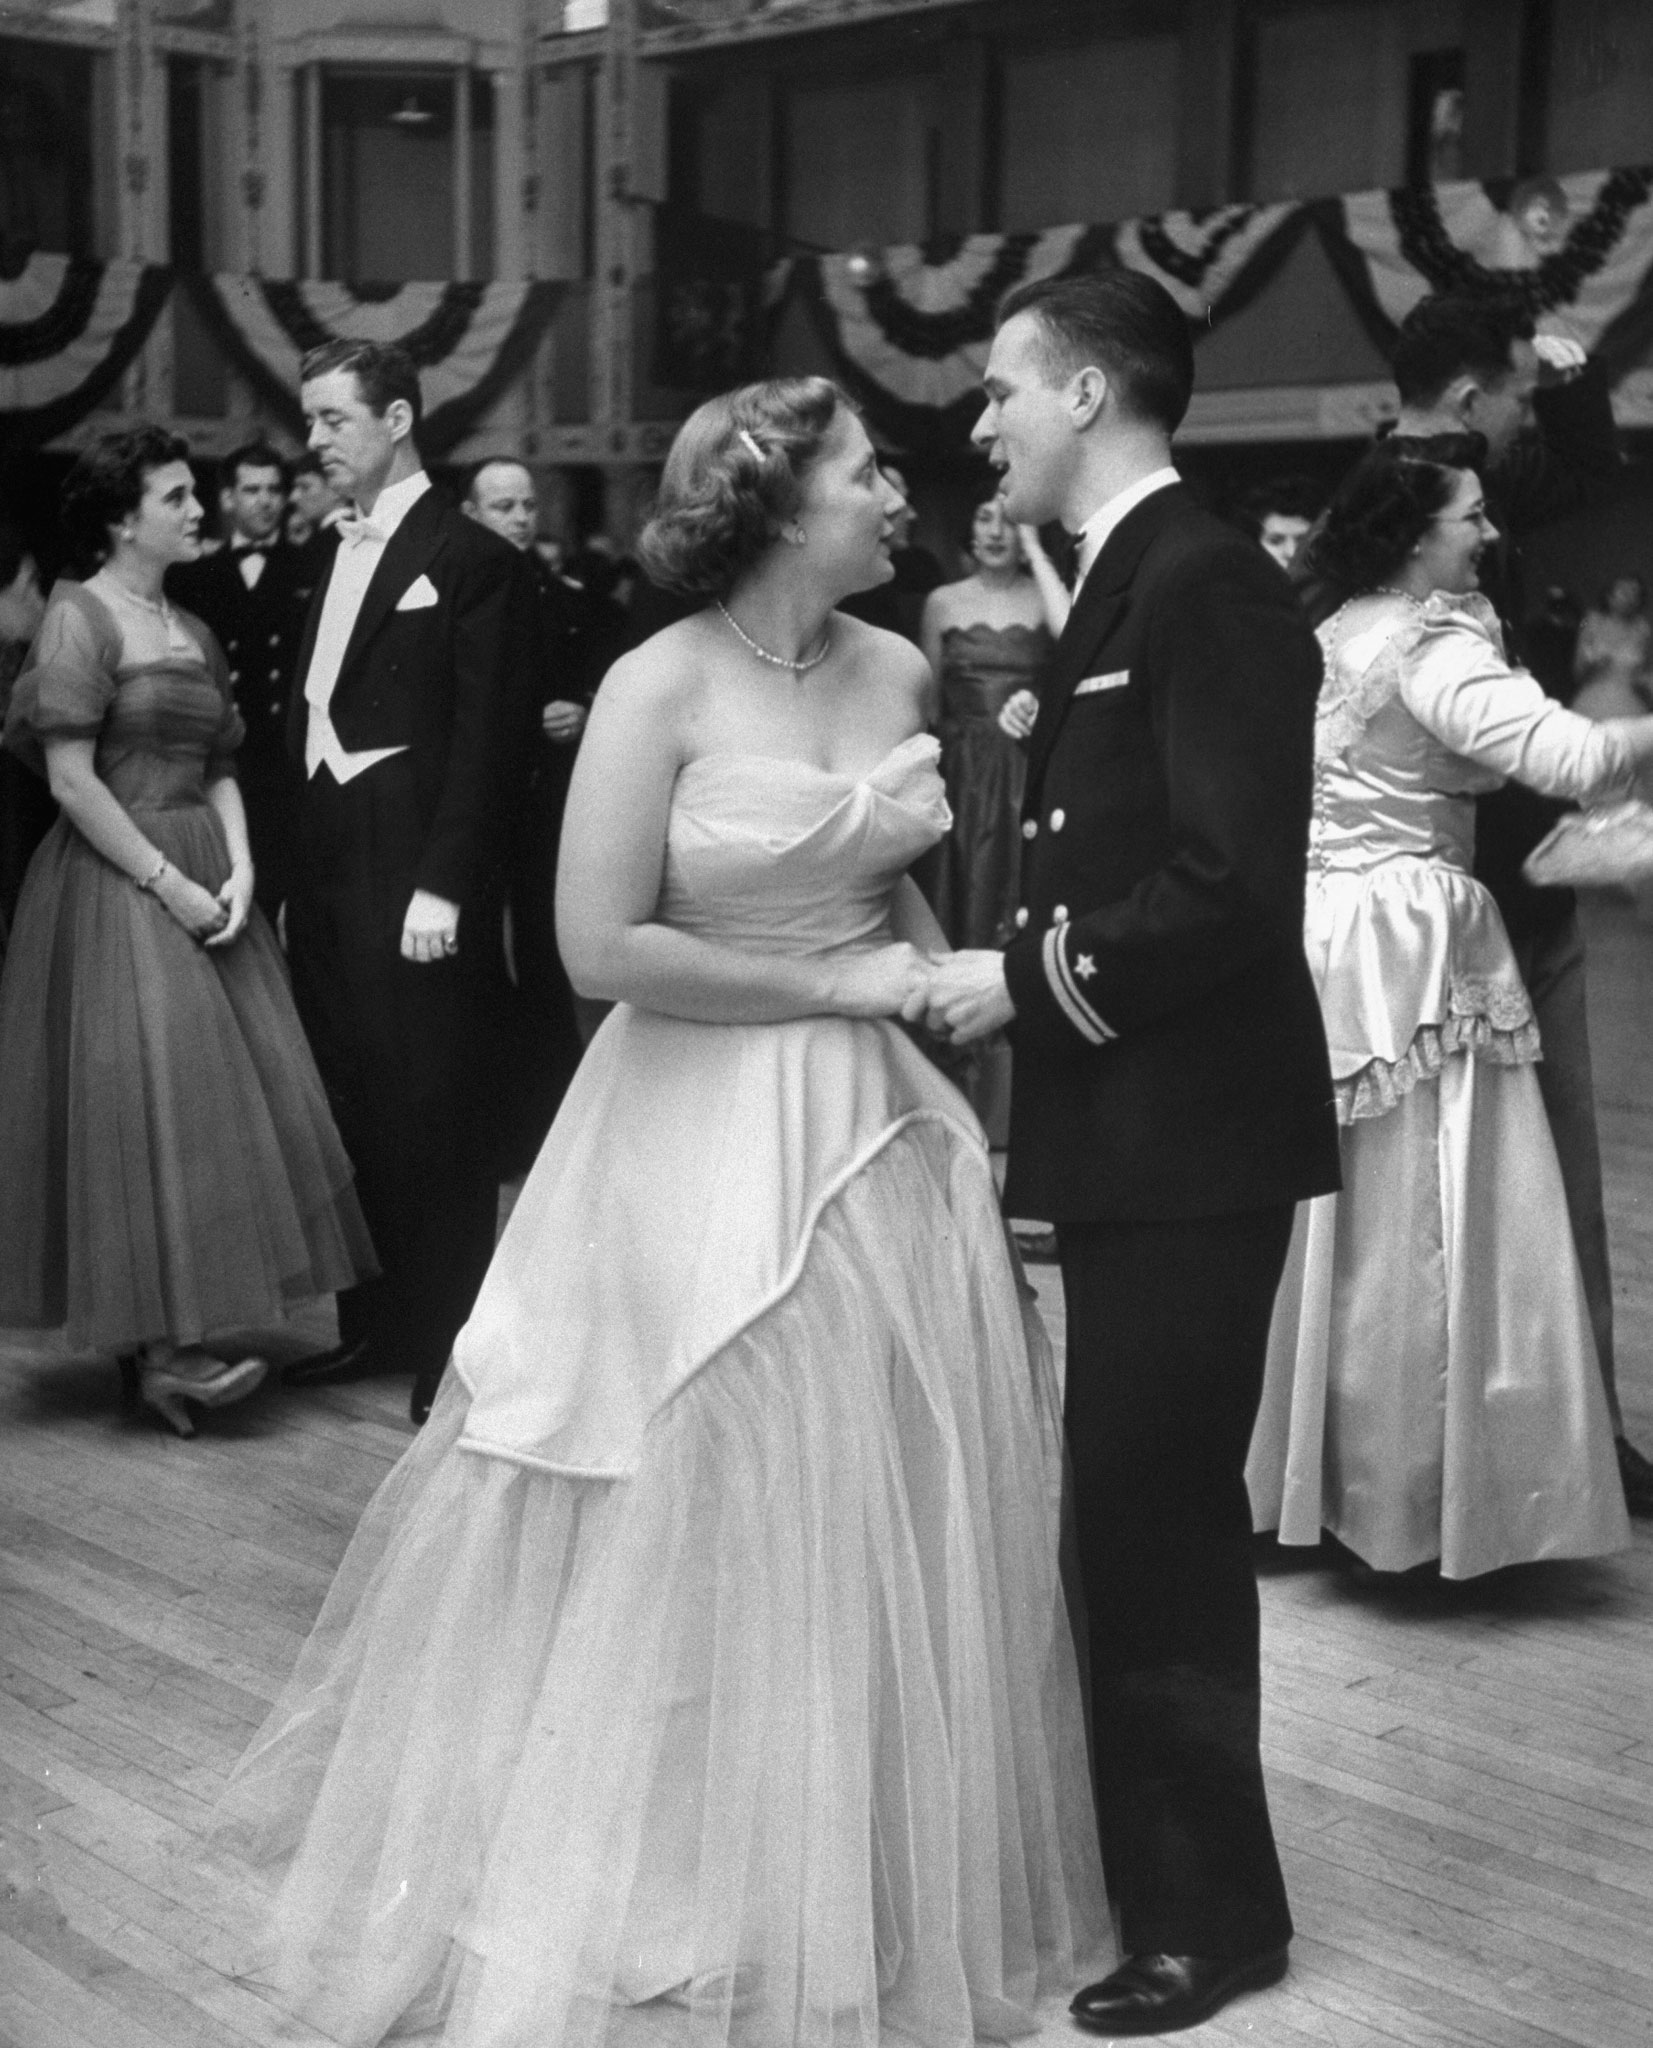 Now down to 155 pounds, an attractive Dorothy dances at Navy Ball